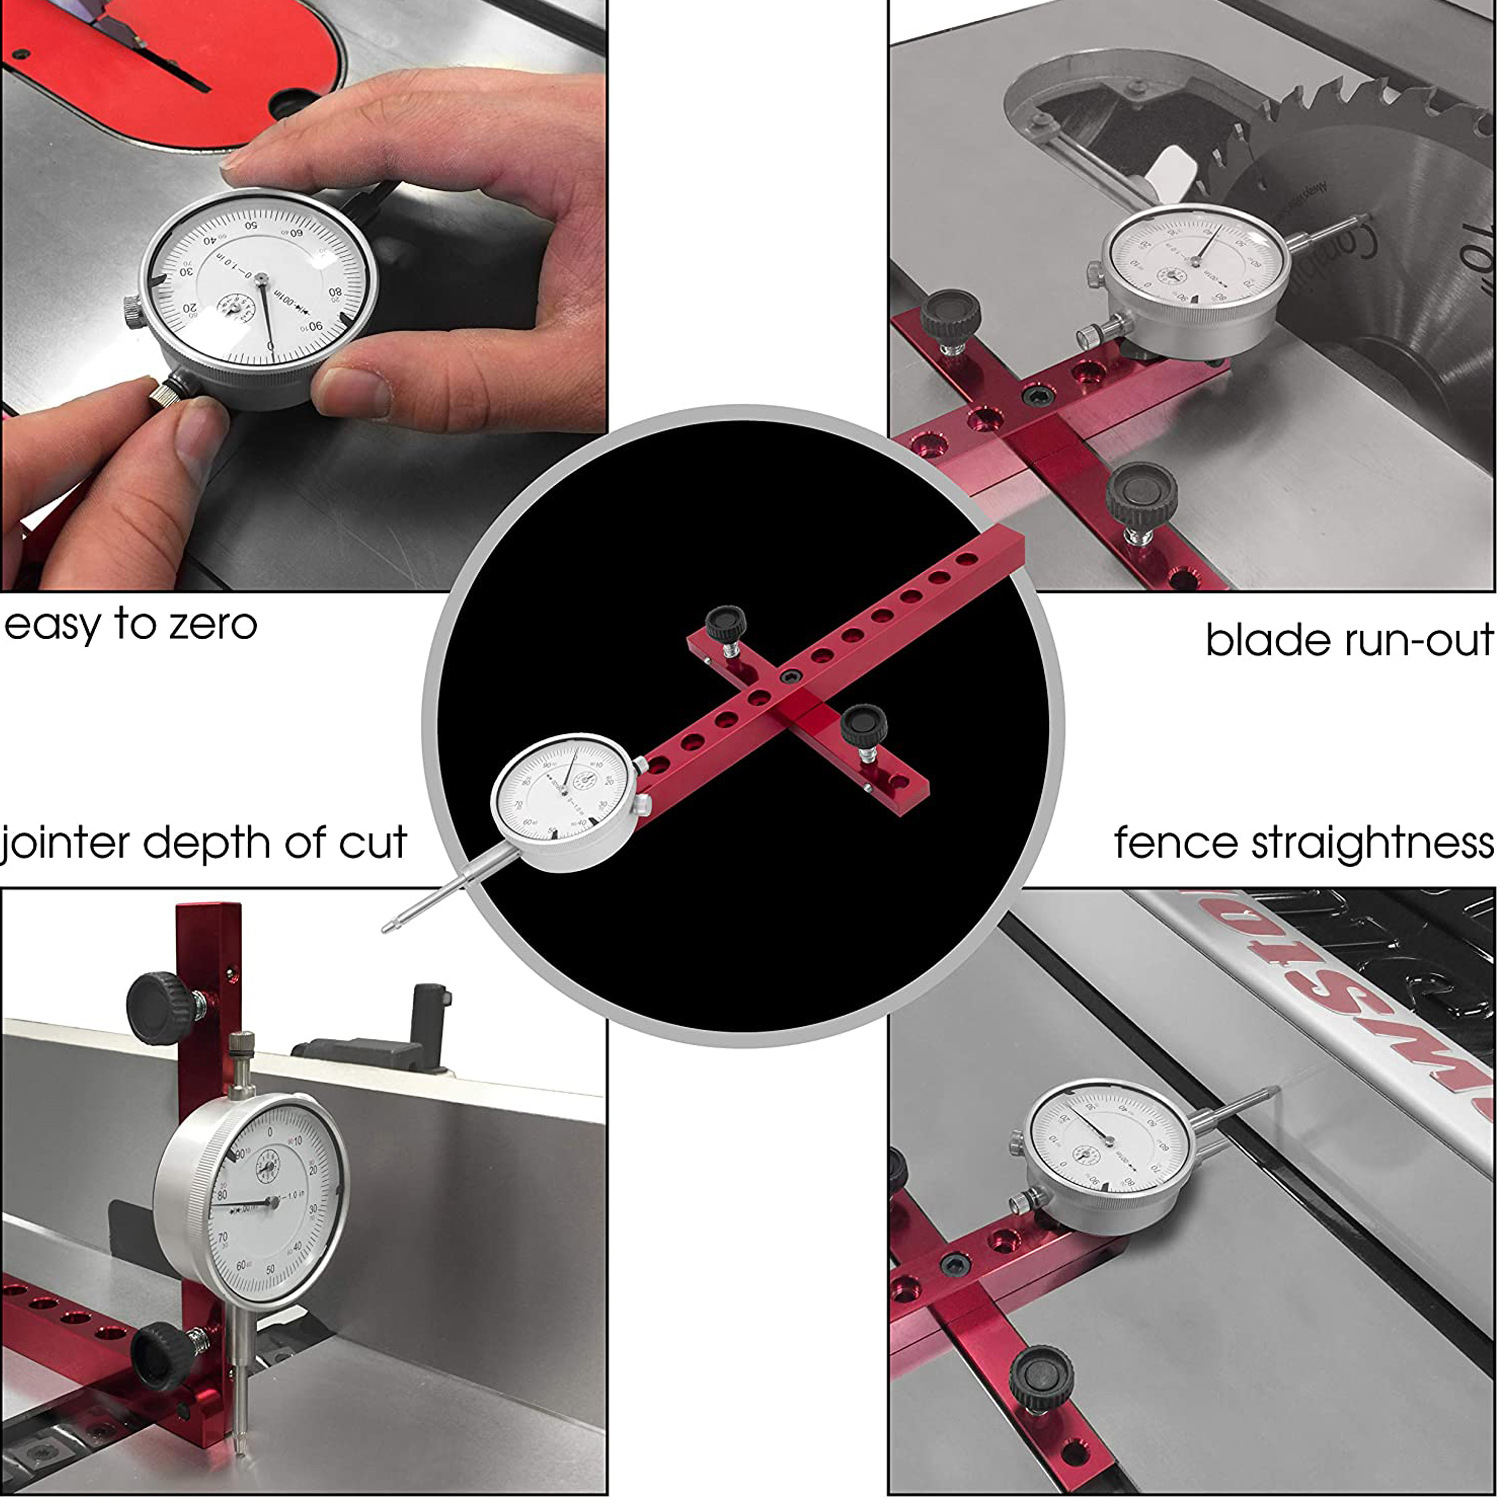 Table-Saw-Dial-Indicator-Gauge-Tool-Alignment-System-A-Line-It-Basic-Kit-Saw-Table-Aligning-and-Cali-1958496-4